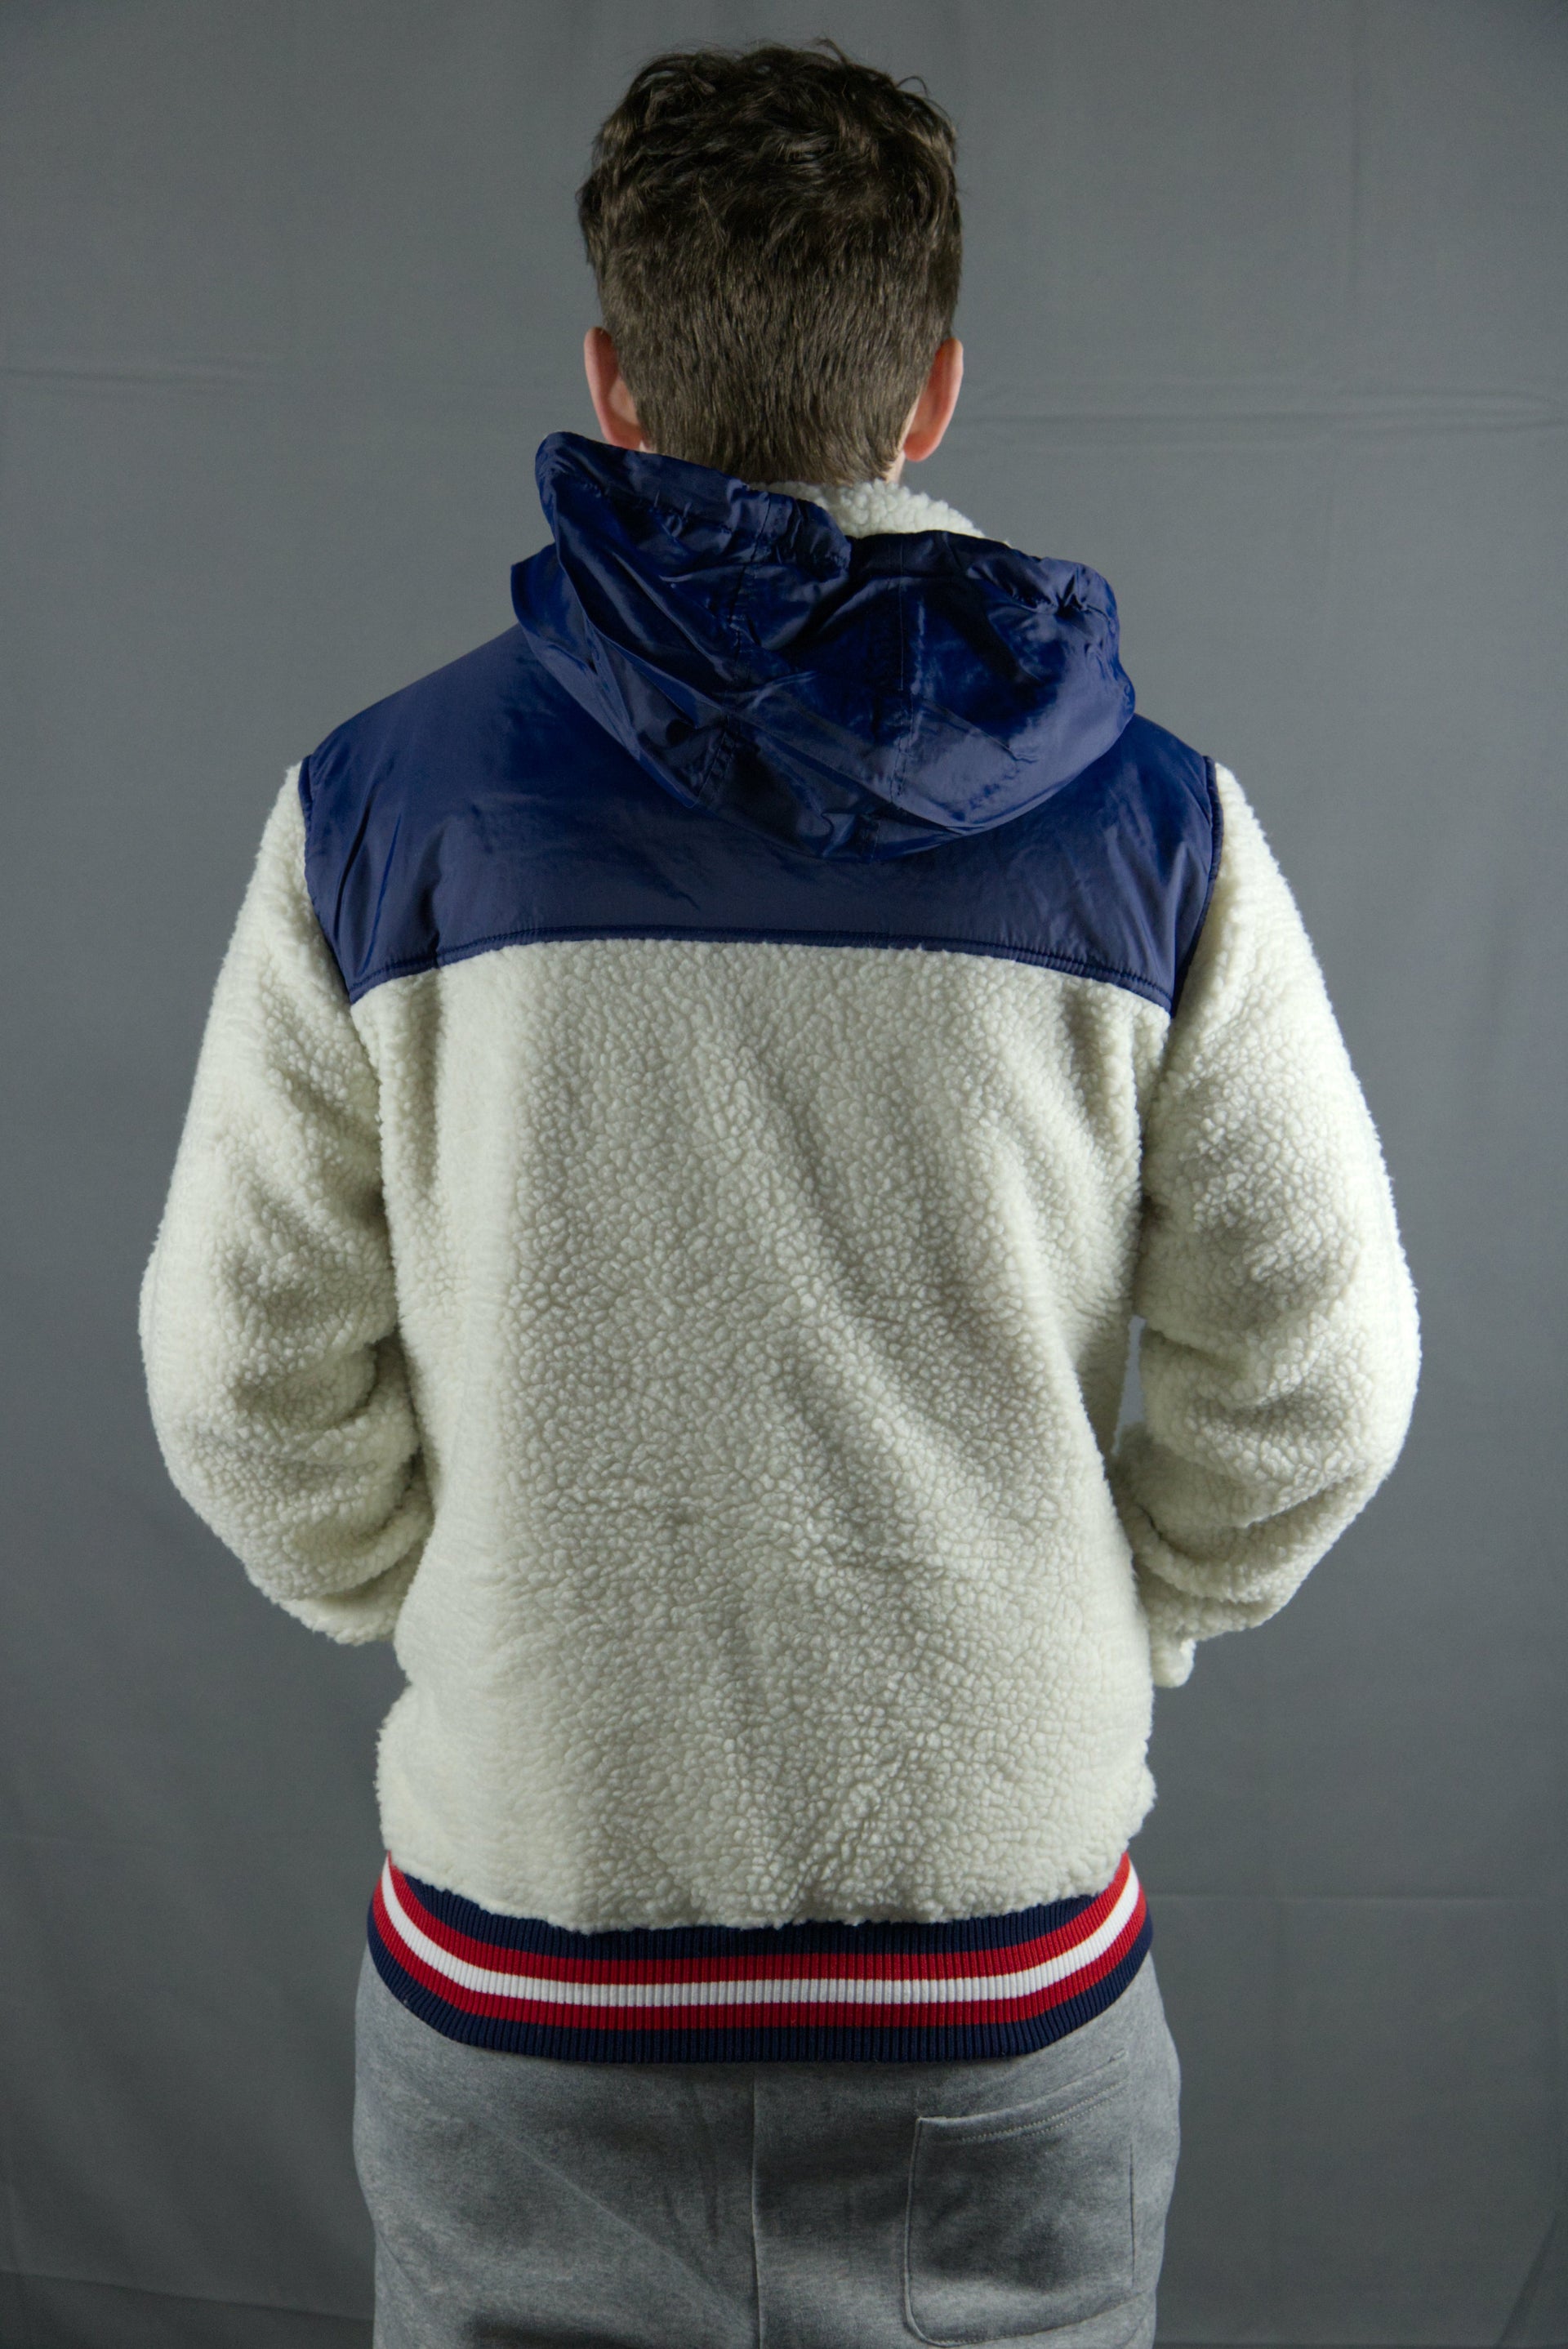 The sherpa material on the cream zipper sherpa hoodie is cream coloed